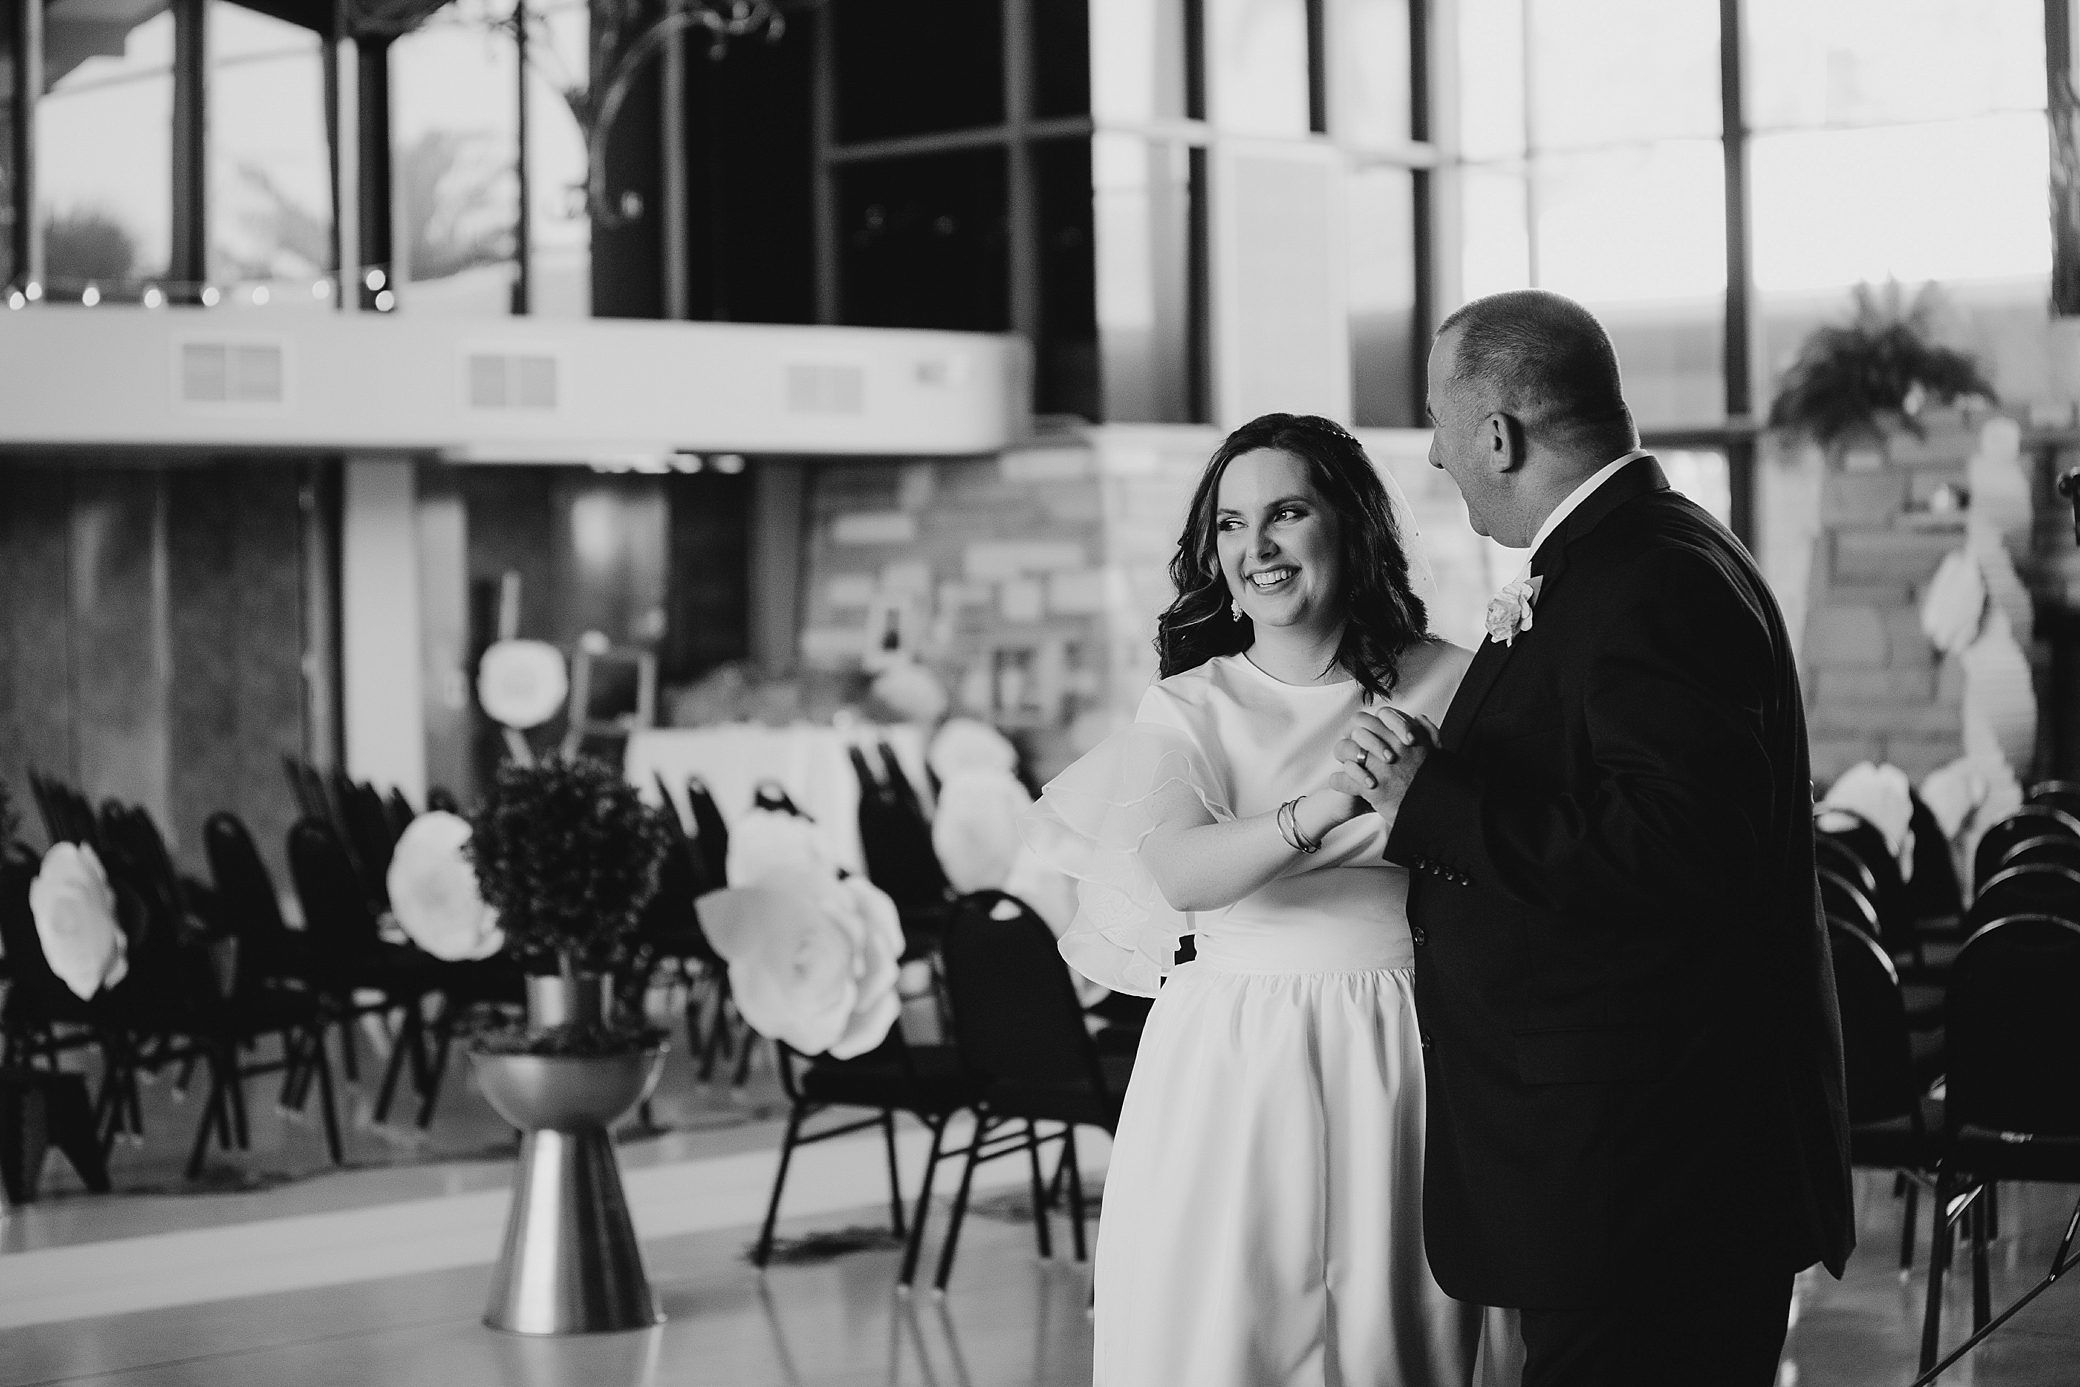 Bride and Groom first dance at surprise wedding | Megan Montalvo Photography